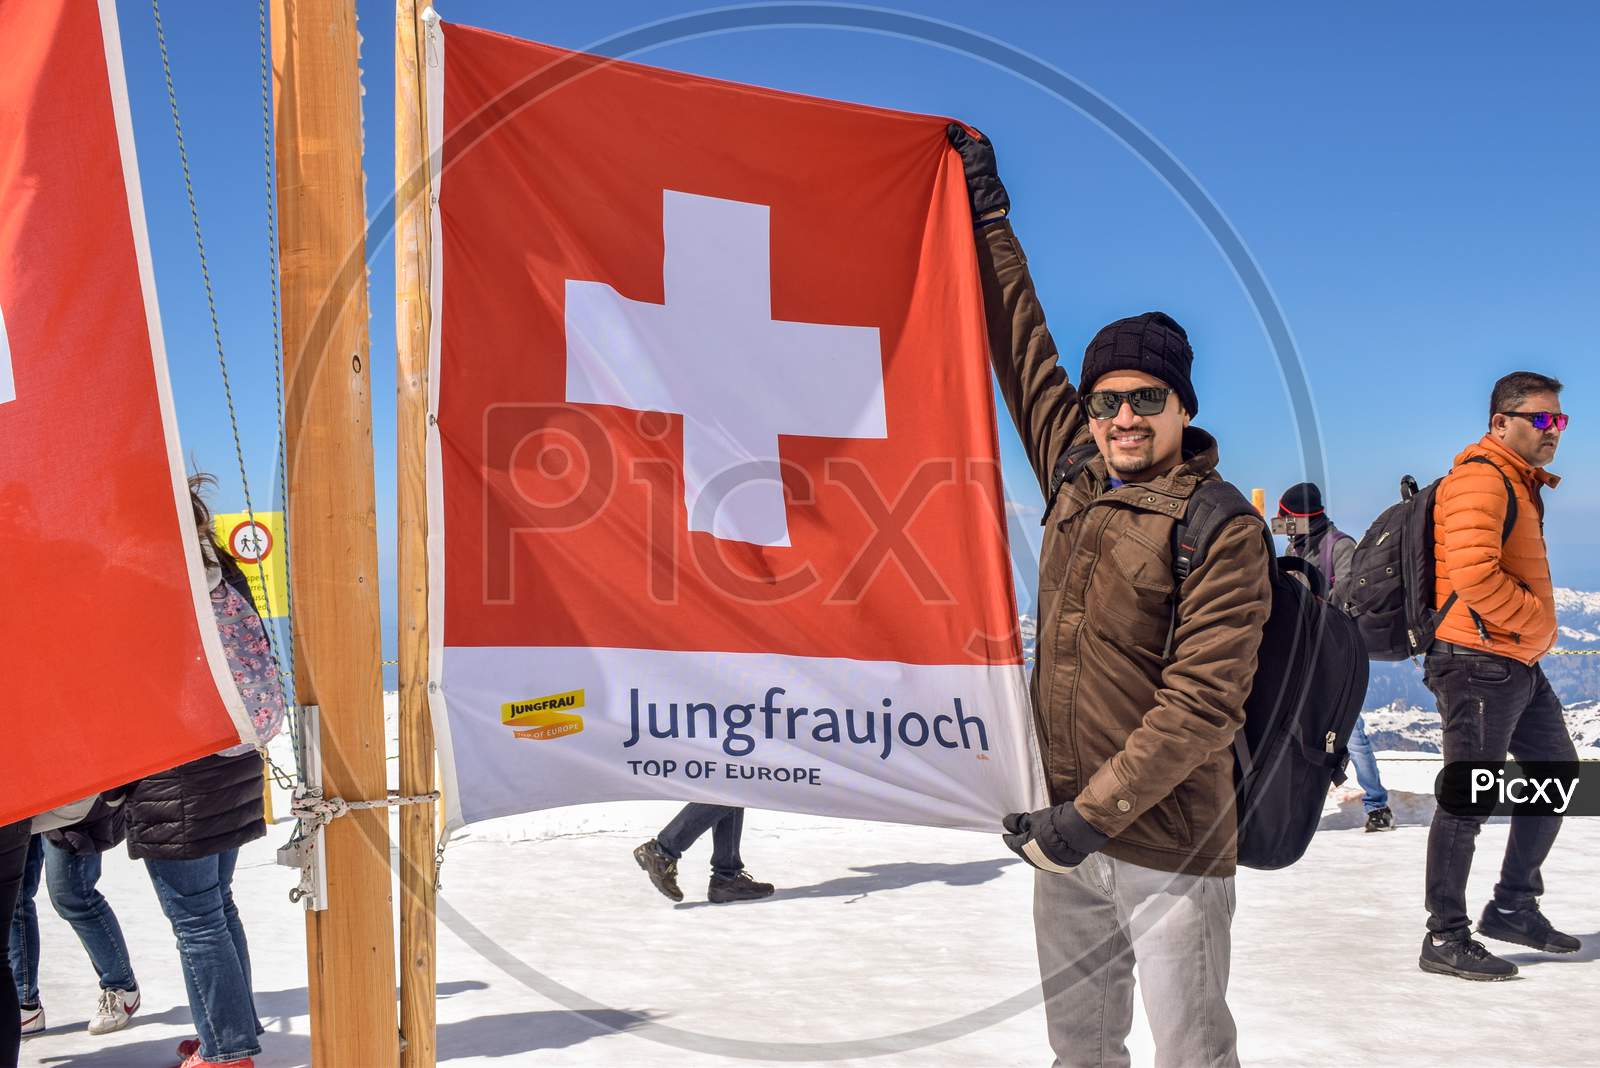 Jungfraujoch / Switzerland : April 20, 2019: Man Holding Flag of Switzerland hoisted on Highest Mountain Peak in Europe known as Jungfrau. It is the most visited place by tourists